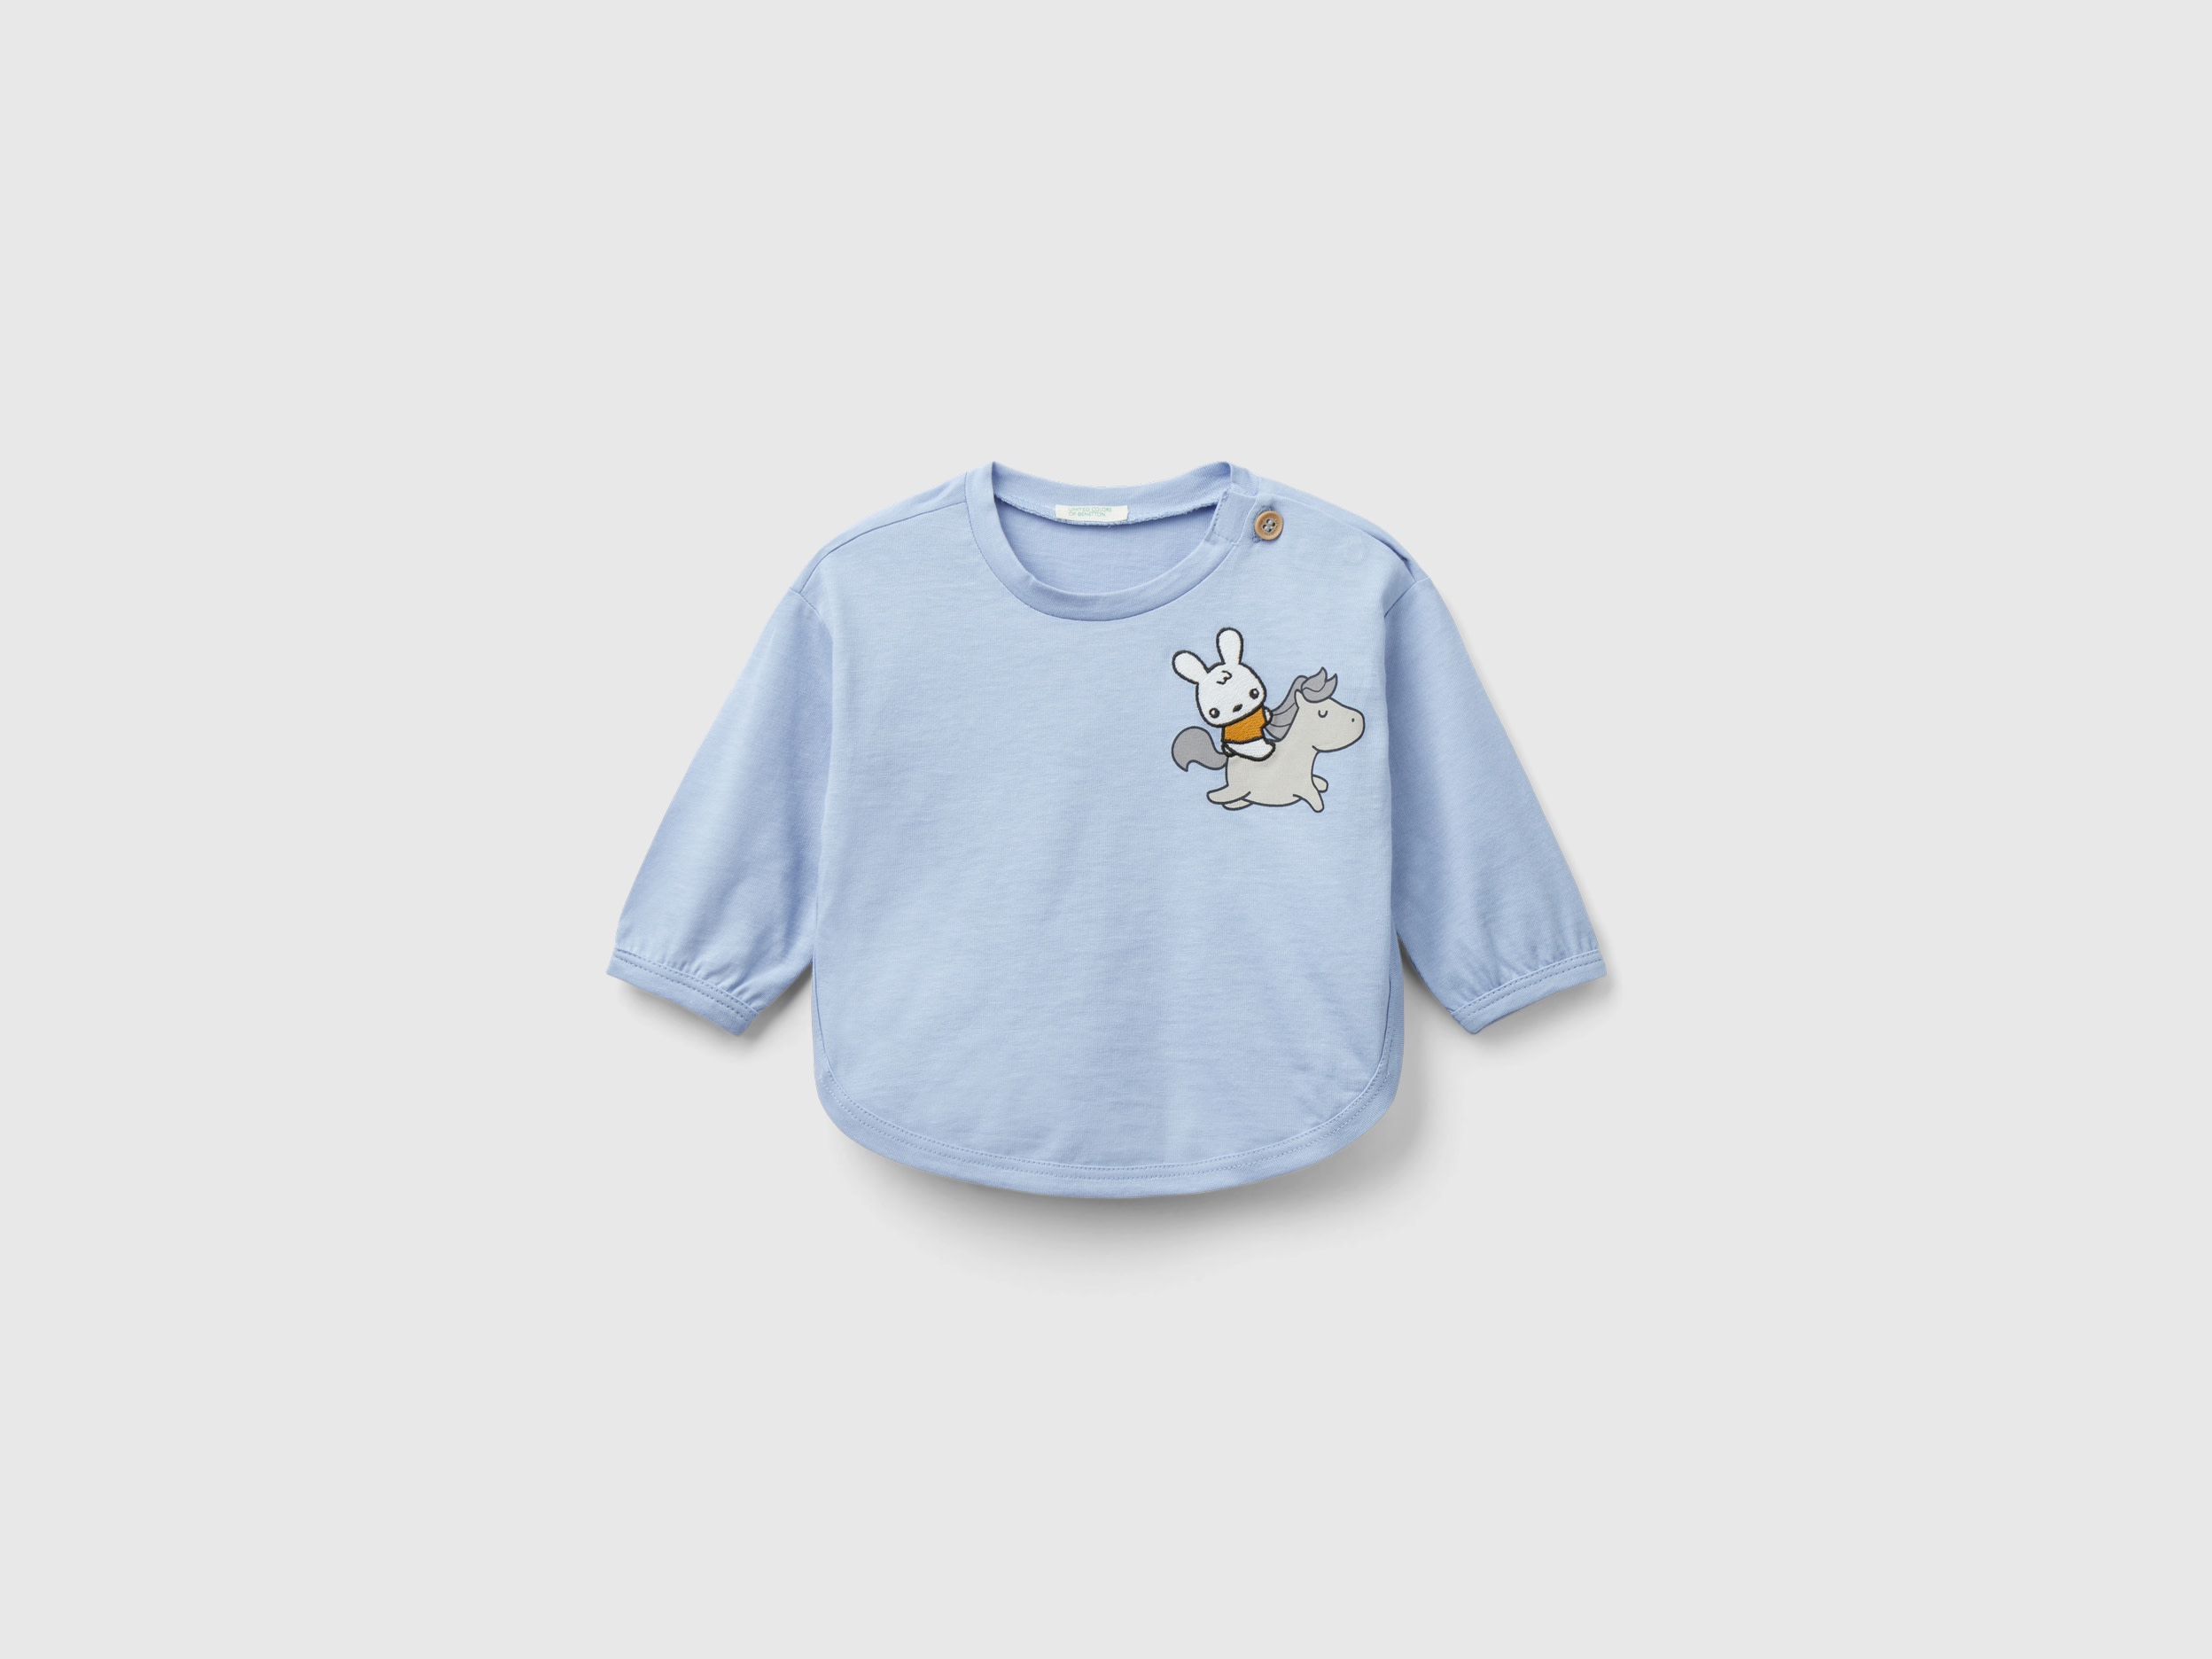 Image of Benetton, T-shirt In Organic Cotton With Print, size 50, Sky Blue, Kids